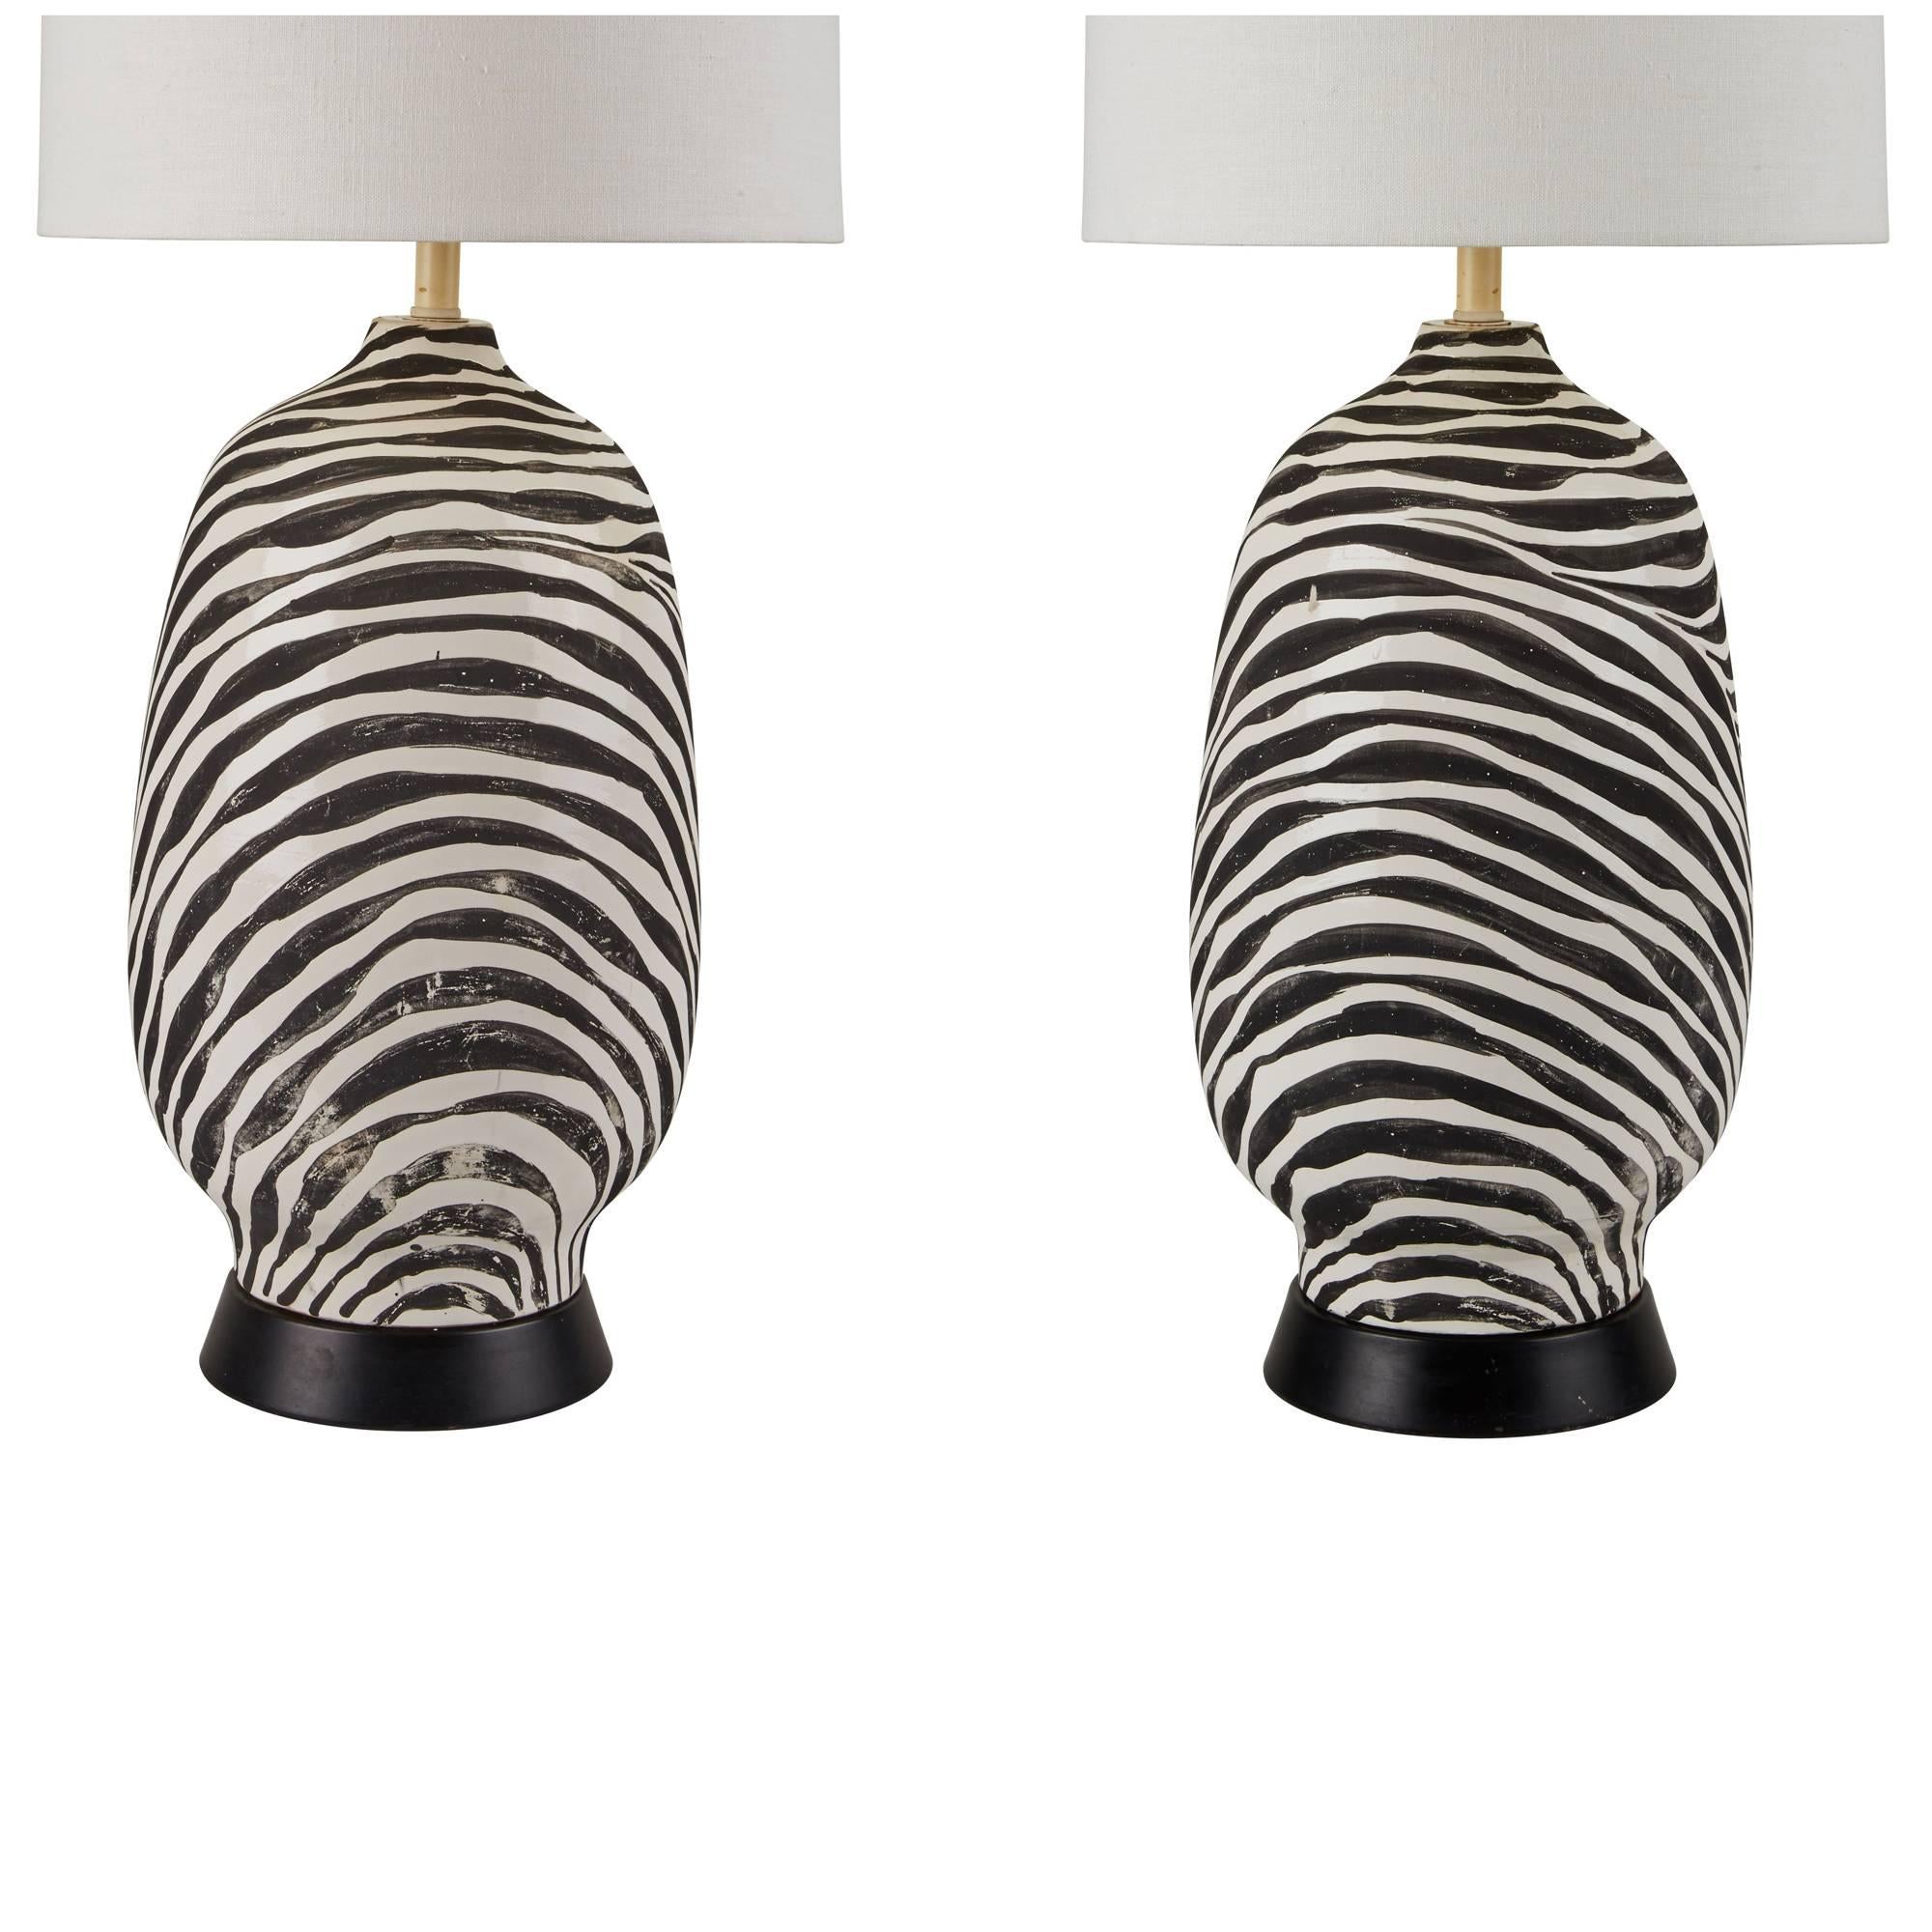 Rare Pair of Ugo Zaccagnini Table Lamps